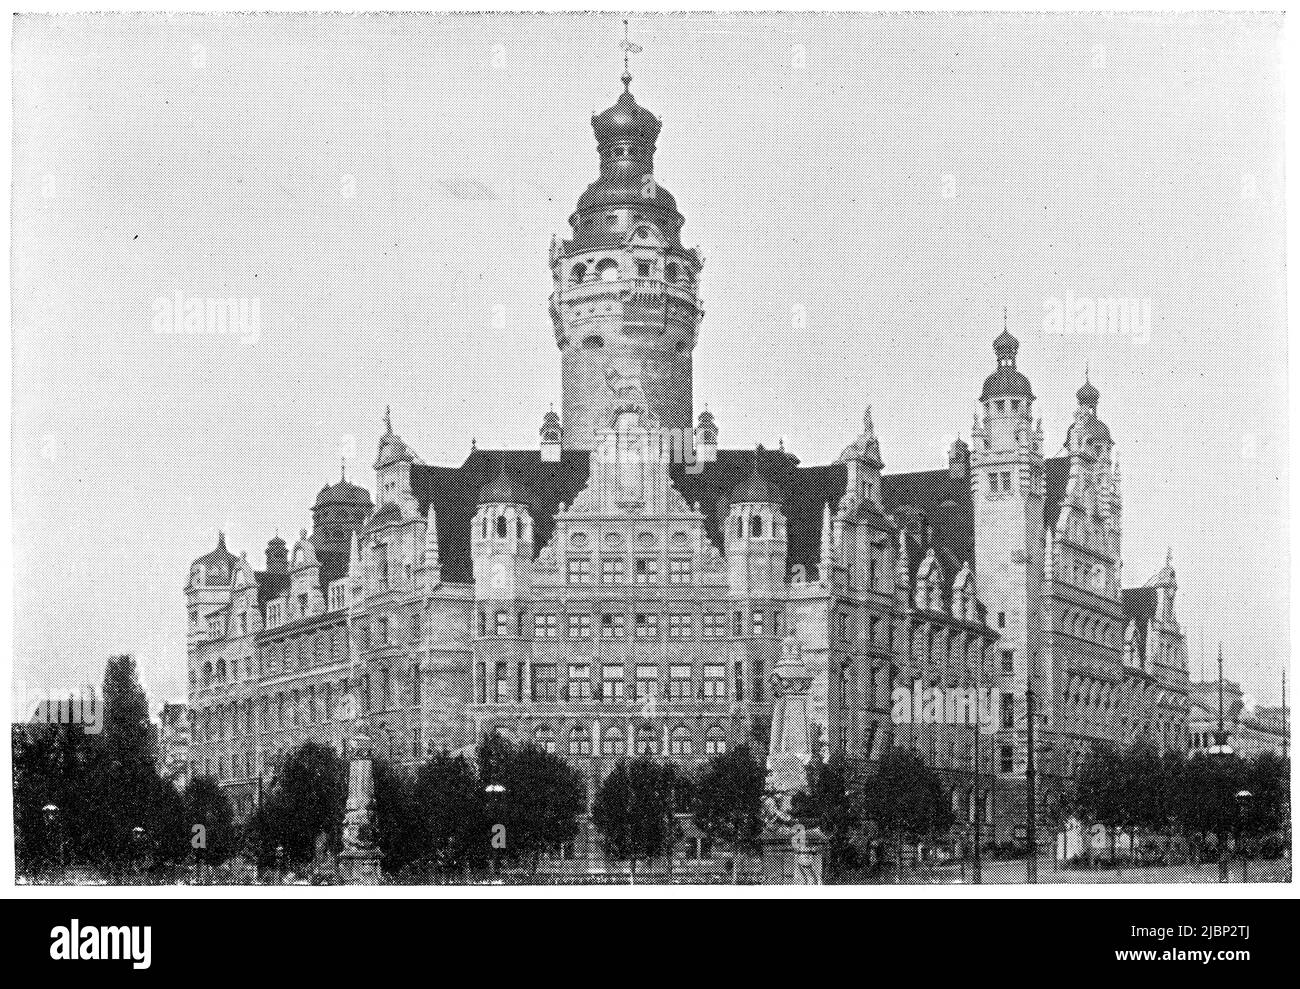 Leipzig New Town Hall (Neues Rathaus) by the architect Hugo Georg Licht. Publication of the book 'Meyers Konversations-Lexikon', Volume 2, Leipzig, Germany, 1910 Stock Photo